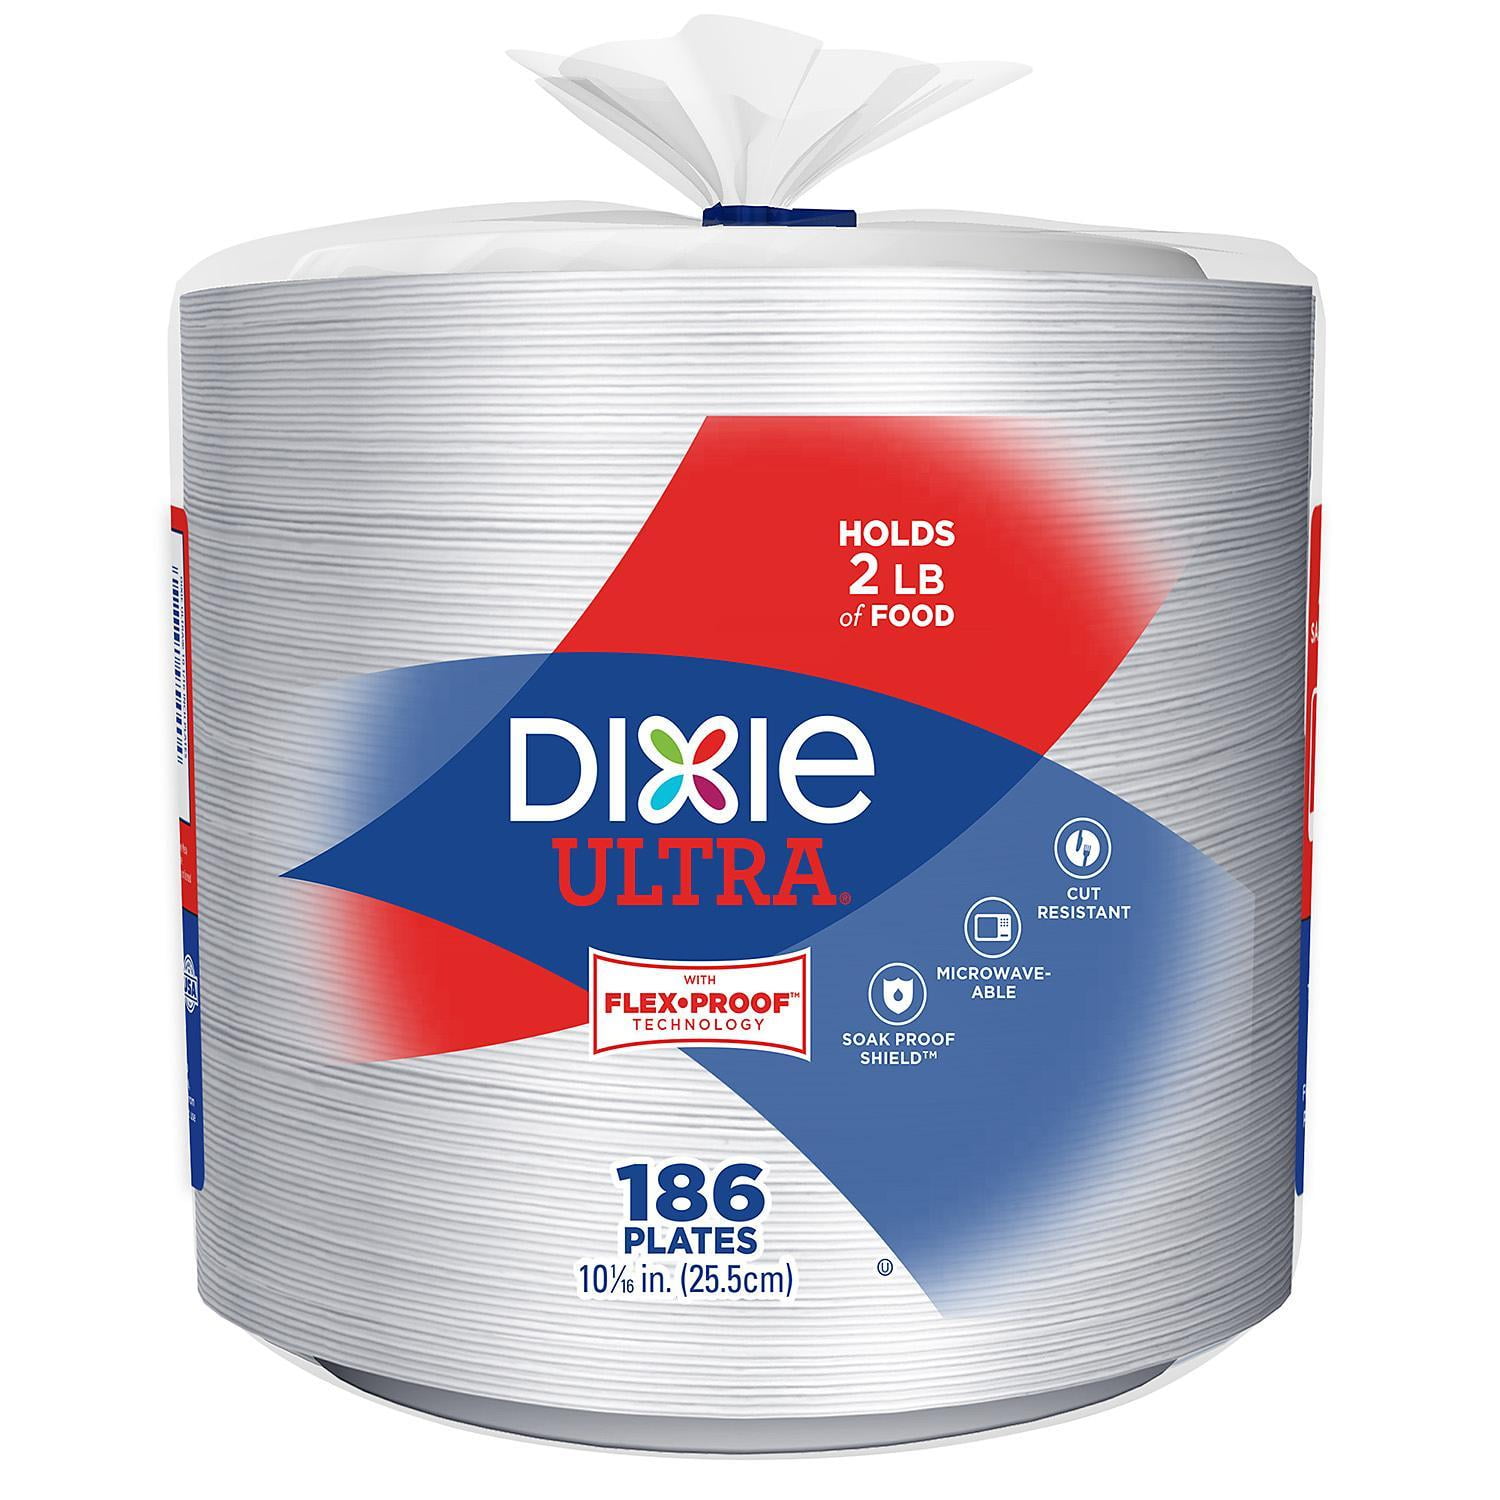 Dixie Ultra 10-1/16 inch Paper Plates 100-Count 